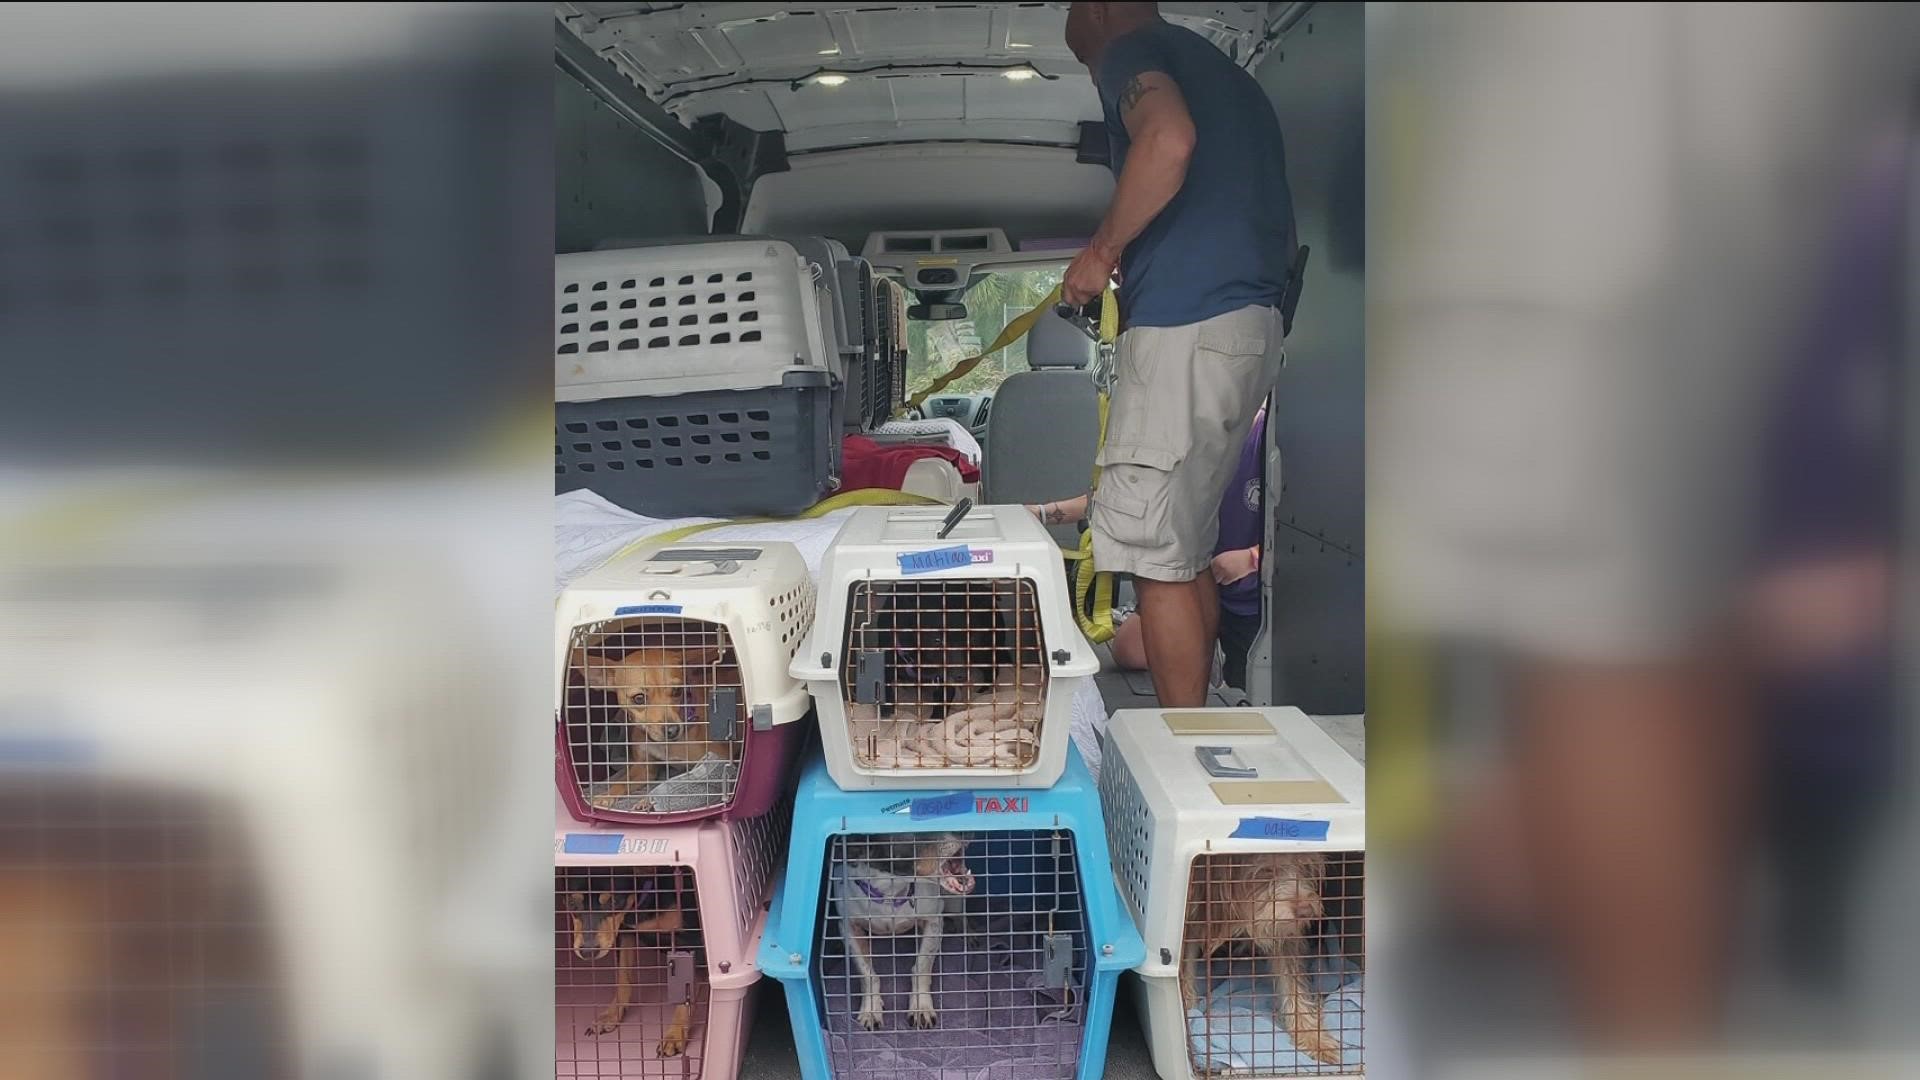 Gary Willoughby, the director of the Fort Myers Humane Society, said he didn't have time to get his animals to safety.